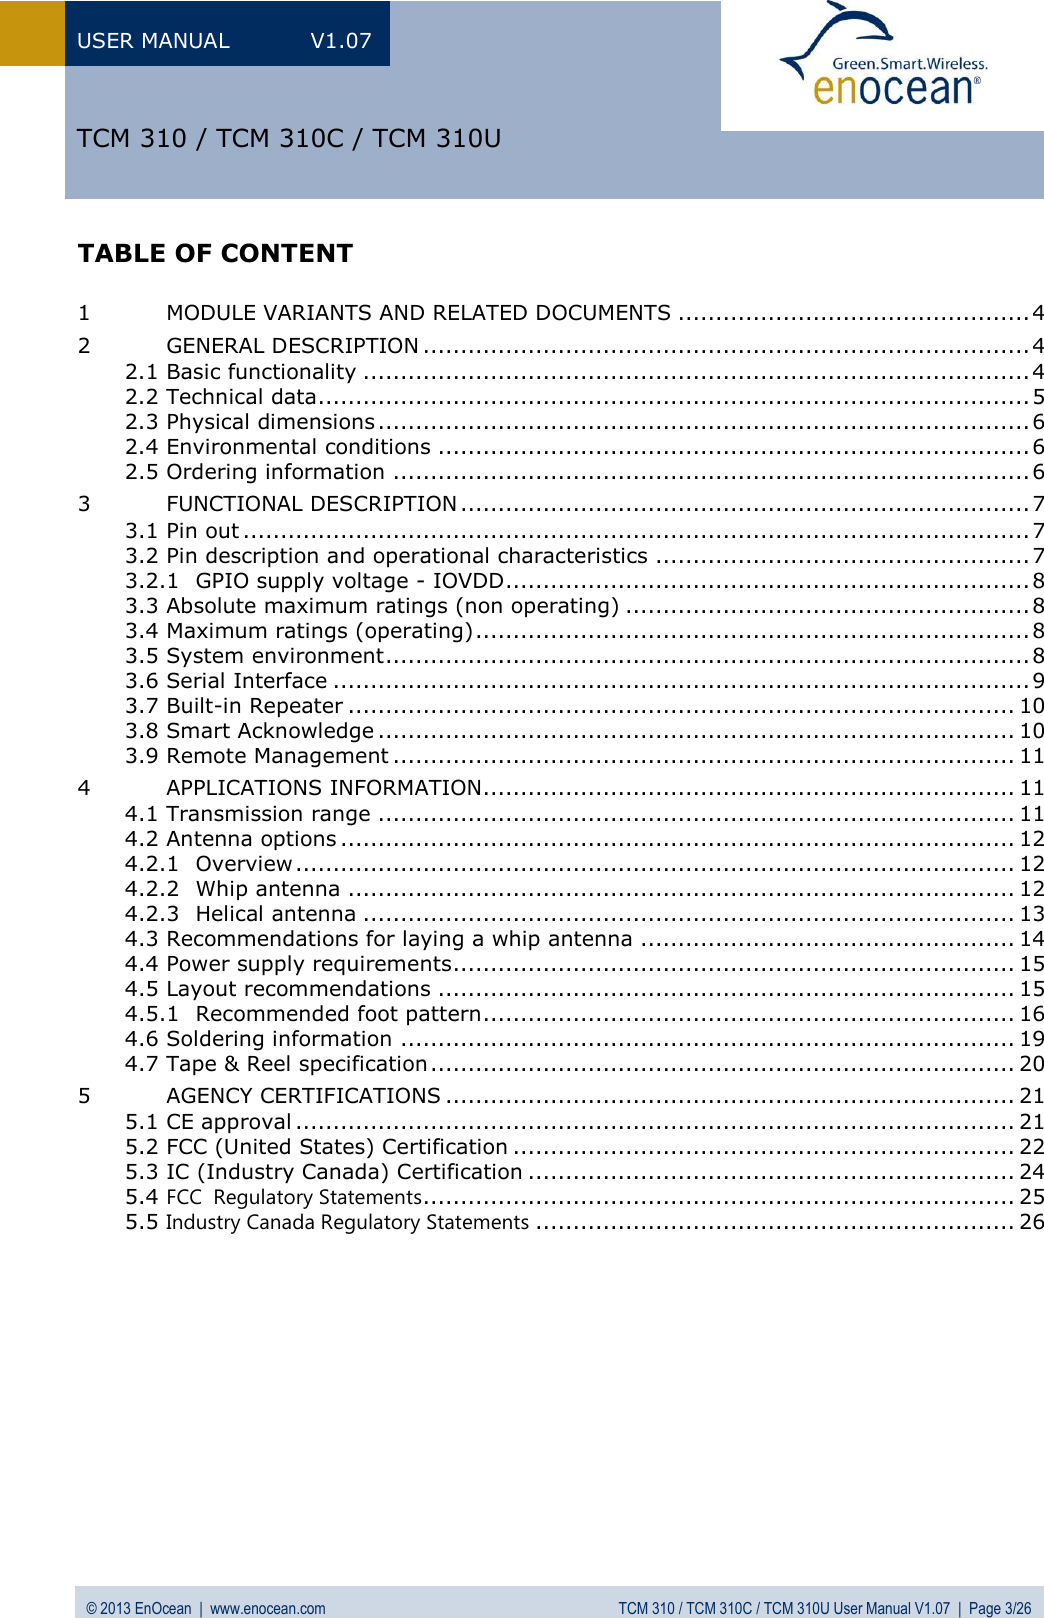 USER MANUAL  V1.07 © 2013 EnOcean  |  www.enocean.com  TCM 310 / TCM 310C / TCM 310U User Manual V1.07  |  Page 3/26   TCM 310 / TCM 310C / TCM 310U TABLE OF CONTENT  1 MODULE VARIANTS AND RELATED DOCUMENTS ............................................... 4 2 GENERAL DESCRIPTION ................................................................................. 4 2.1 Basic functionality ......................................................................................... 4 2.2 Technical data ............................................................................................... 5 2.3 Physical dimensions ....................................................................................... 6 2.4 Environmental conditions ............................................................................... 6 2.5 Ordering information ..................................................................................... 6 3 FUNCTIONAL DESCRIPTION ............................................................................ 7 3.1 Pin out ......................................................................................................... 7 3.2 Pin description and operational characteristics .................................................. 7 3.2.1 GPIO supply voltage - IOVDD ...................................................................... 8 3.3 Absolute maximum ratings (non operating) ...................................................... 8 3.4 Maximum ratings (operating) .......................................................................... 8 3.5 System environment ...................................................................................... 8 3.6 Serial Interface ............................................................................................. 9 3.7 Built-in Repeater ......................................................................................... 10 3.8 Smart Acknowledge ..................................................................................... 10 3.9 Remote Management ................................................................................... 11 4 APPLICATIONS INFORMATION....................................................................... 11 4.1 Transmission range ..................................................................................... 11 4.2 Antenna options .......................................................................................... 12 4.2.1 Overview ................................................................................................ 12 4.2.2 Whip antenna ......................................................................................... 12 4.2.3 Helical antenna ....................................................................................... 13 4.3 Recommendations for laying a whip antenna .................................................. 14 4.4 Power supply requirements ........................................................................... 15 4.5 Layout recommendations ............................................................................. 15 4.5.1 Recommended foot pattern ....................................................................... 16 4.6 Soldering information .................................................................................. 19 4.7 Tape &amp; Reel specification .............................................................................. 20 5 AGENCY CERTIFICATIONS ............................................................................ 21 5.1 CE approval ................................................................................................ 21 5.2 FCC (United States) Certification ................................................................... 22 5.3 IC (Industry Canada) Certification ................................................................. 24 5.4 FCC  Regulatory Statements ............................................................................... 25 5.5 Industry Canada Regulatory Statements ................................................................ 26     